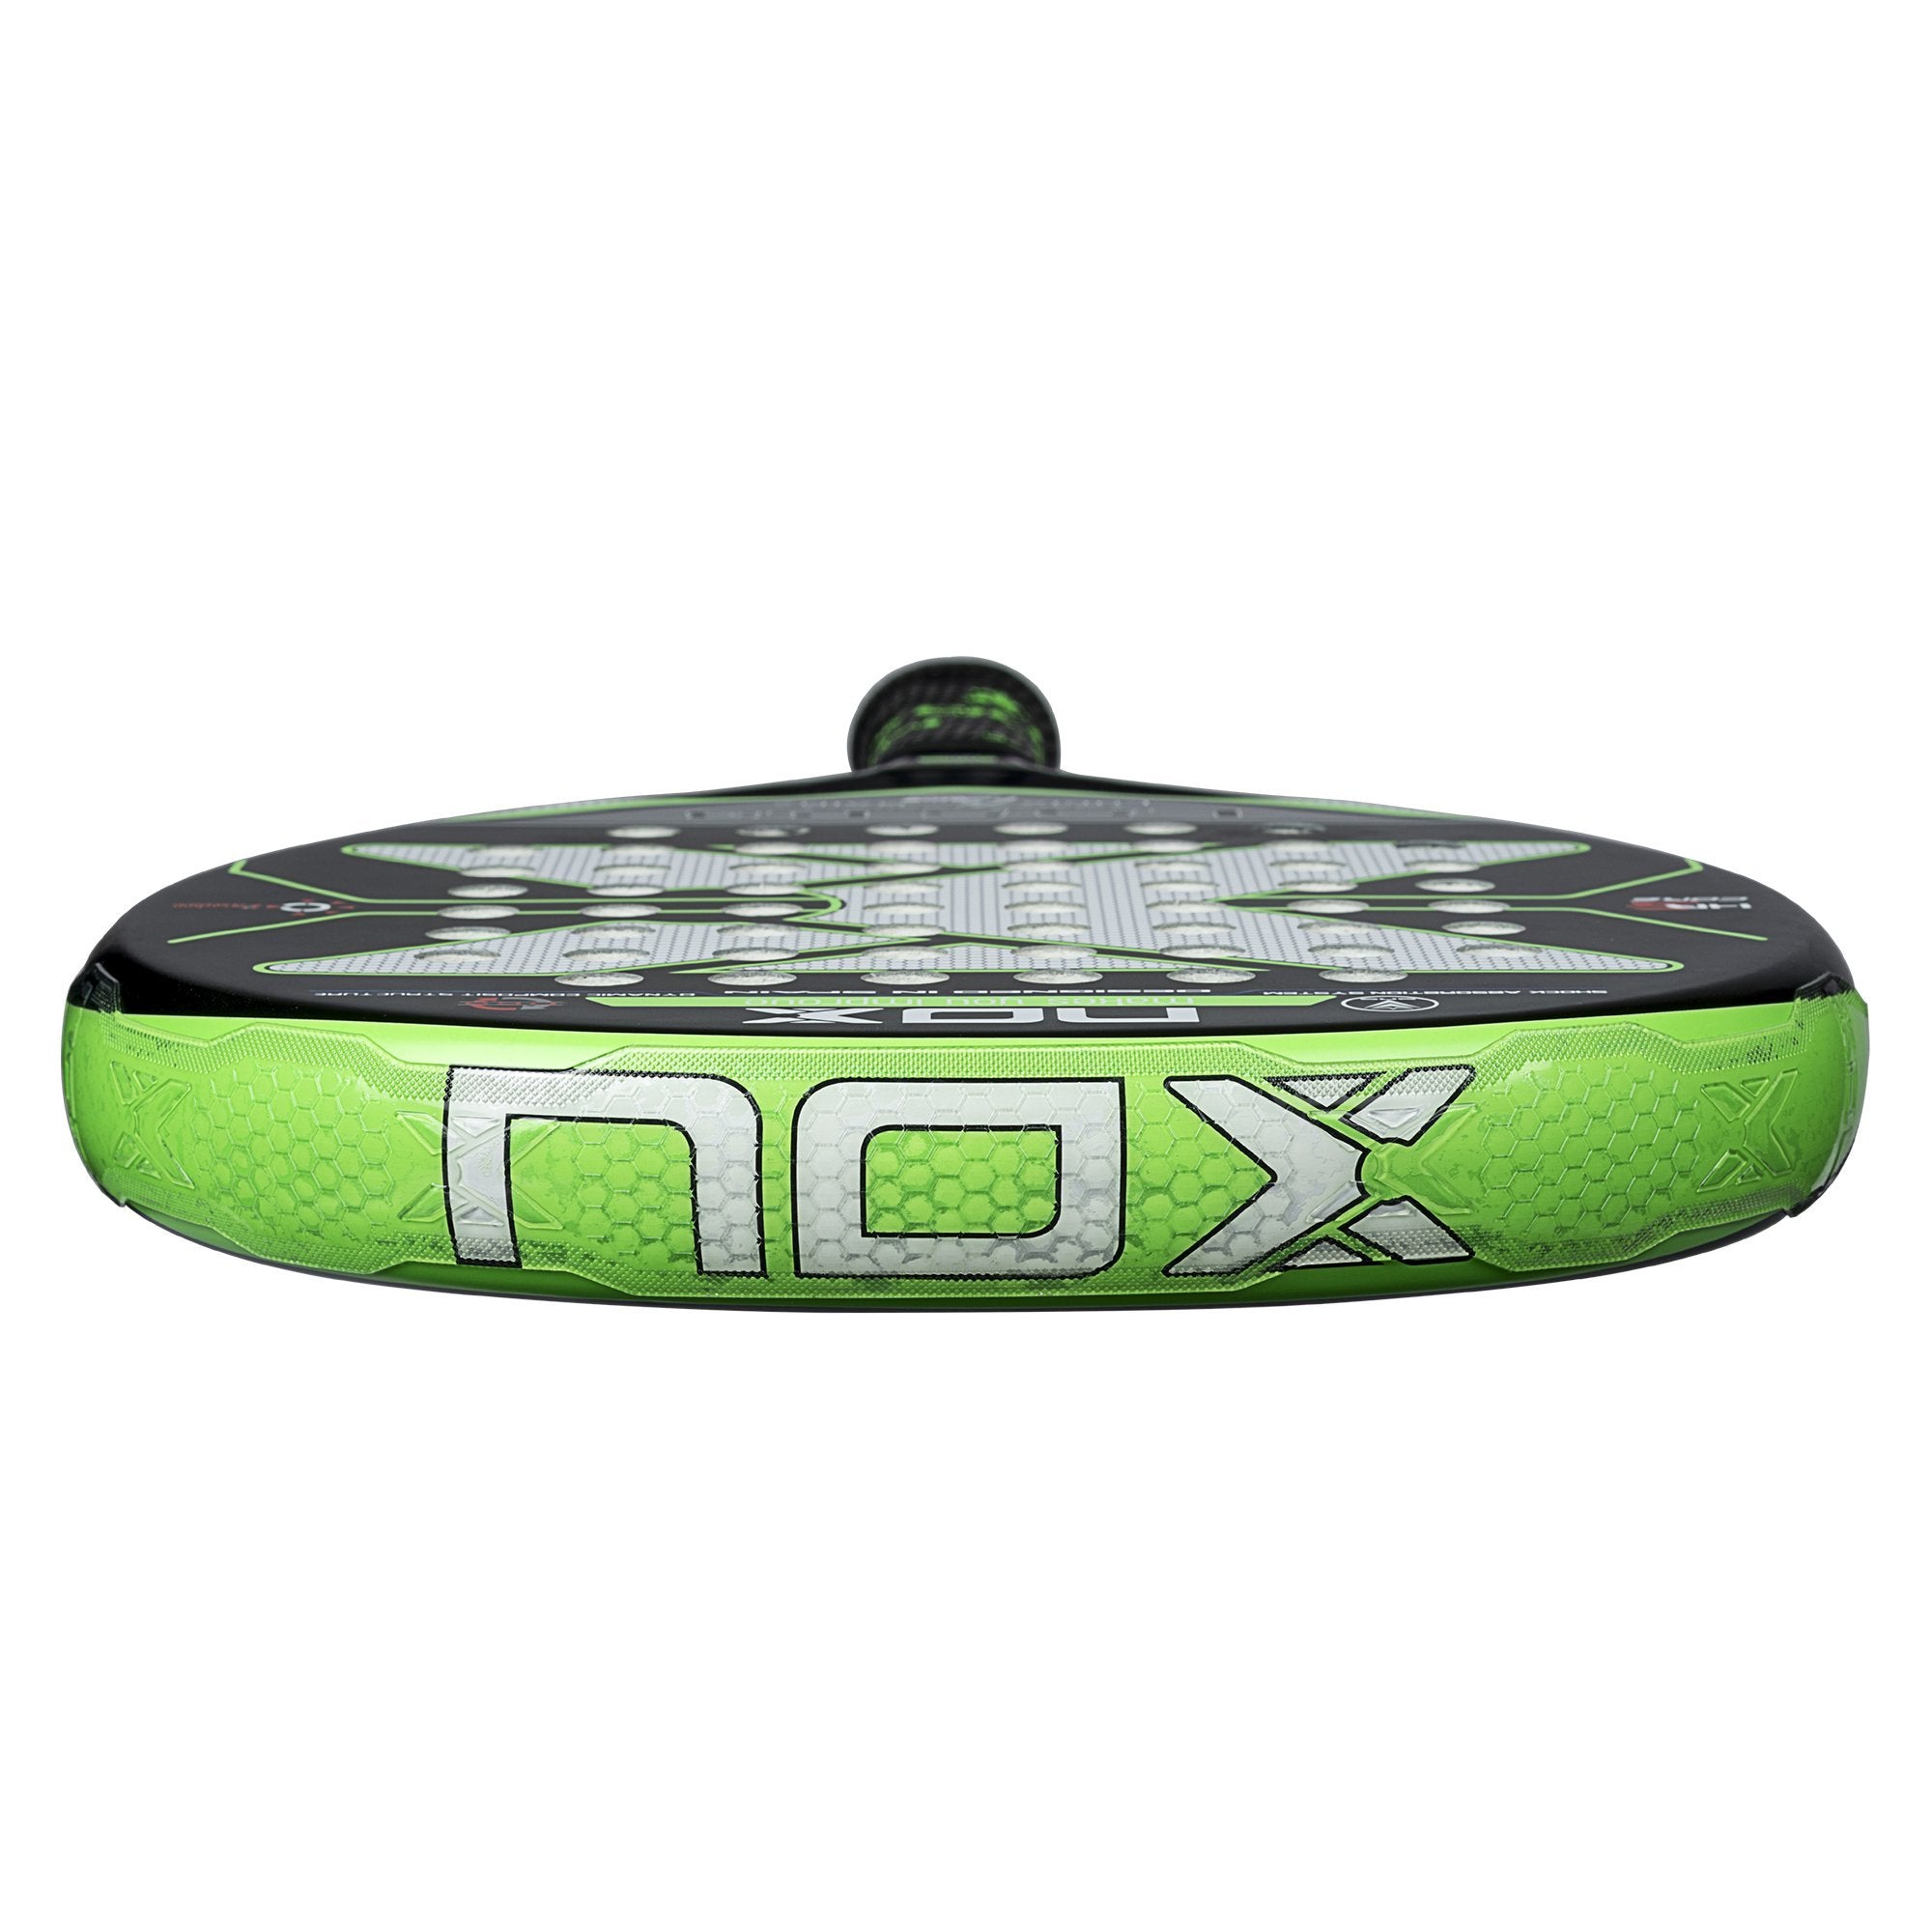 Trying the nox custom grip today. Feels really good in the hand and not  very obstructive. : r/padel